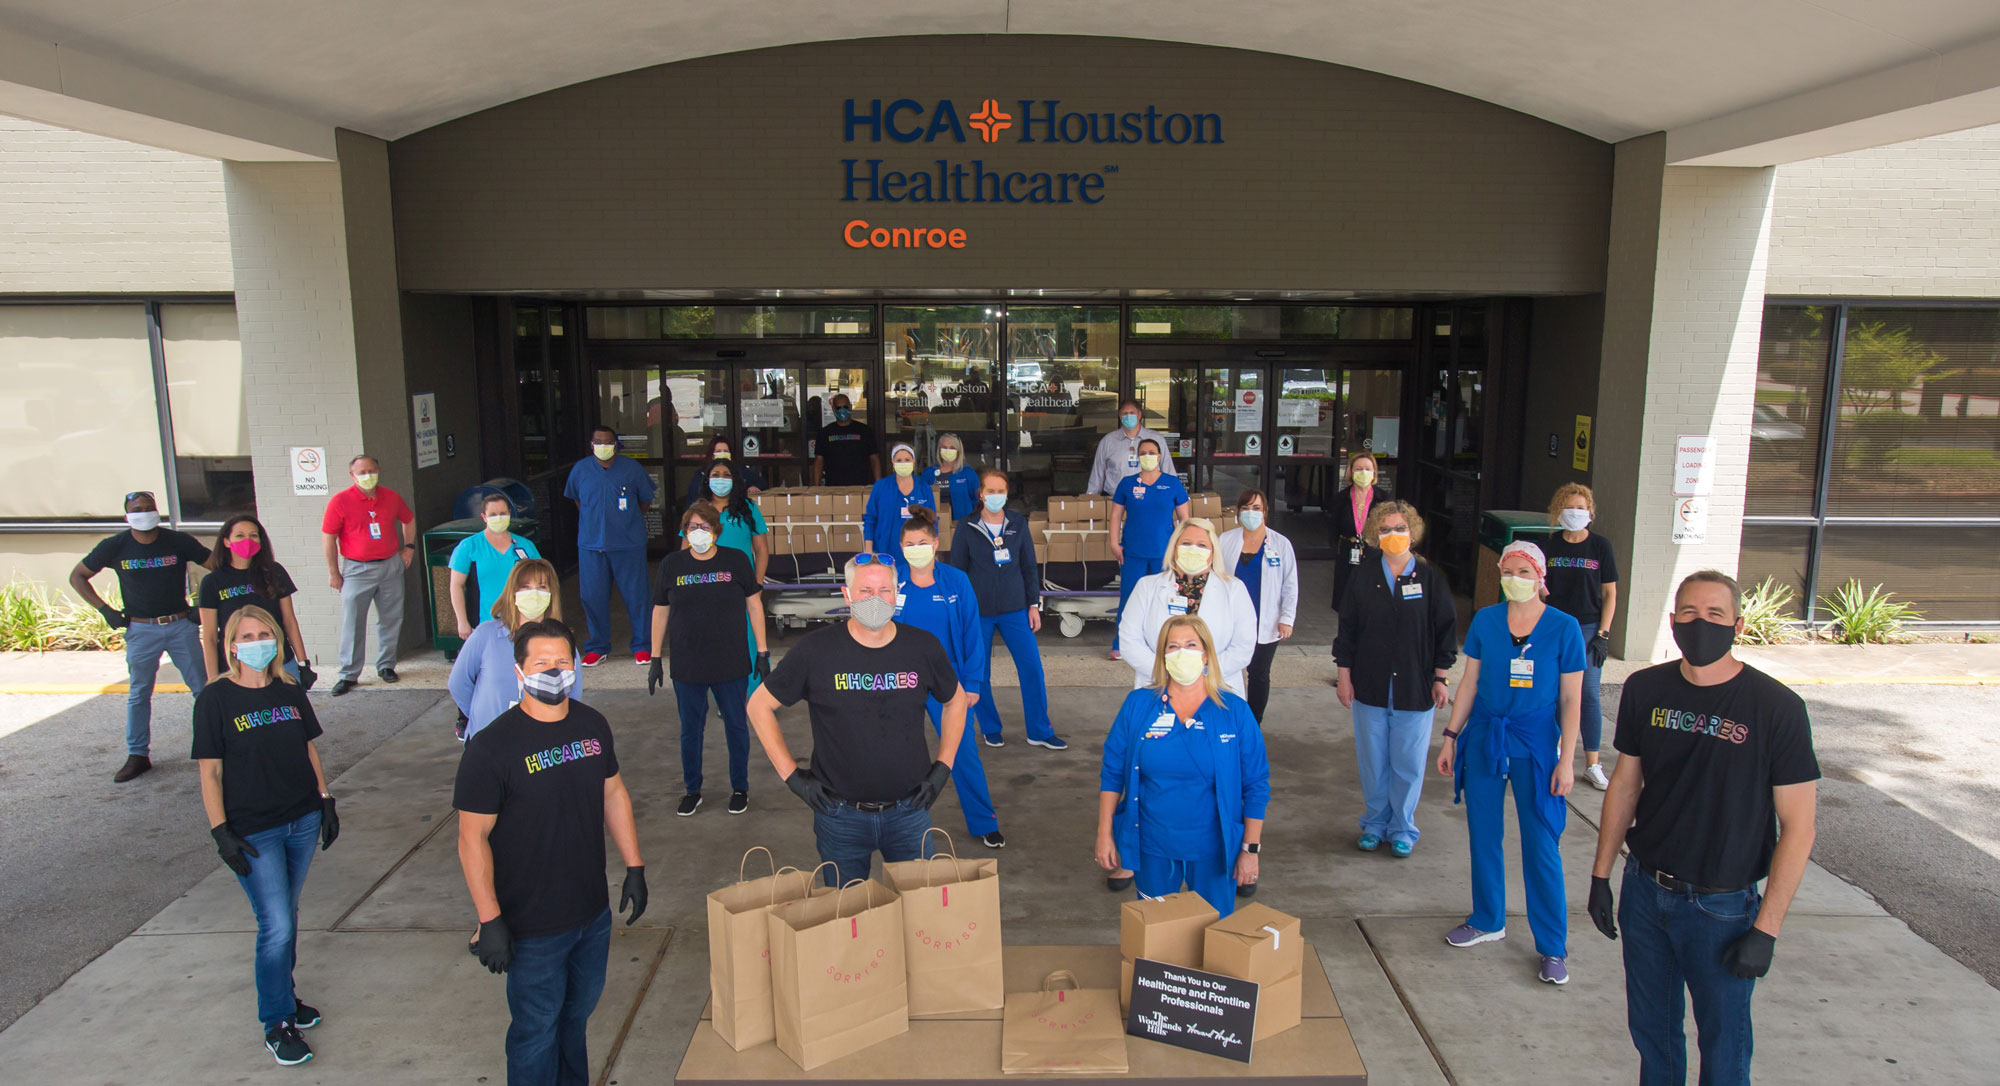 The Woodlands Hills Thanks The HCA Houston Healthcare Conroe Team with Lunch